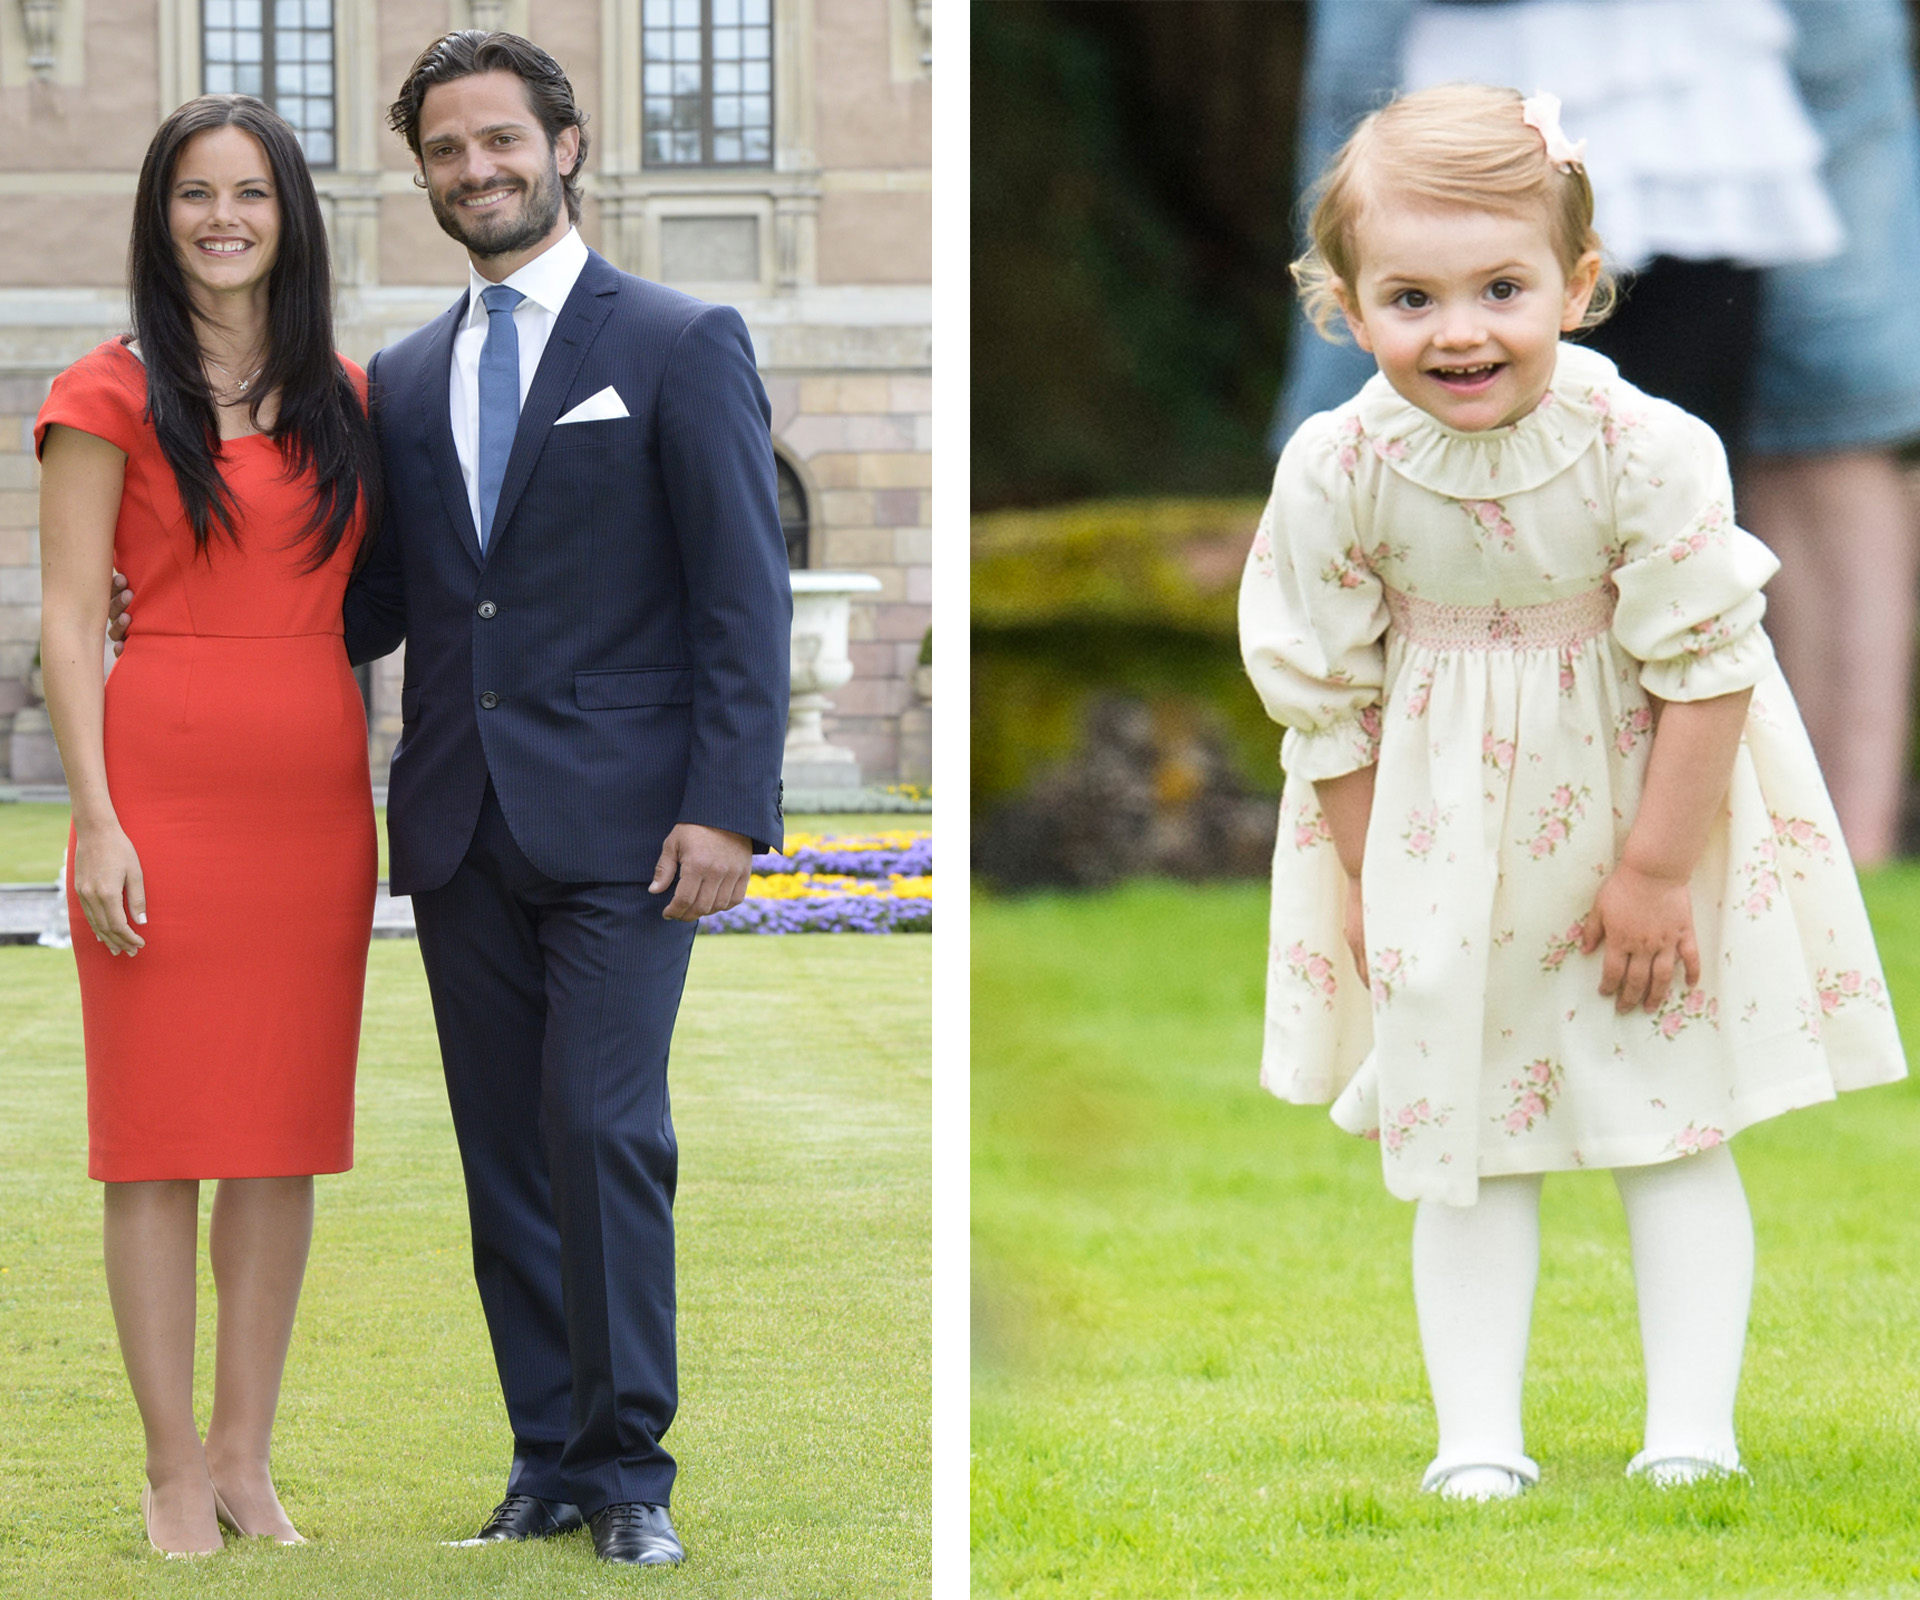 Prince Carl Philip of Sweden and Sofia Hellqvist’s royal ring bearer